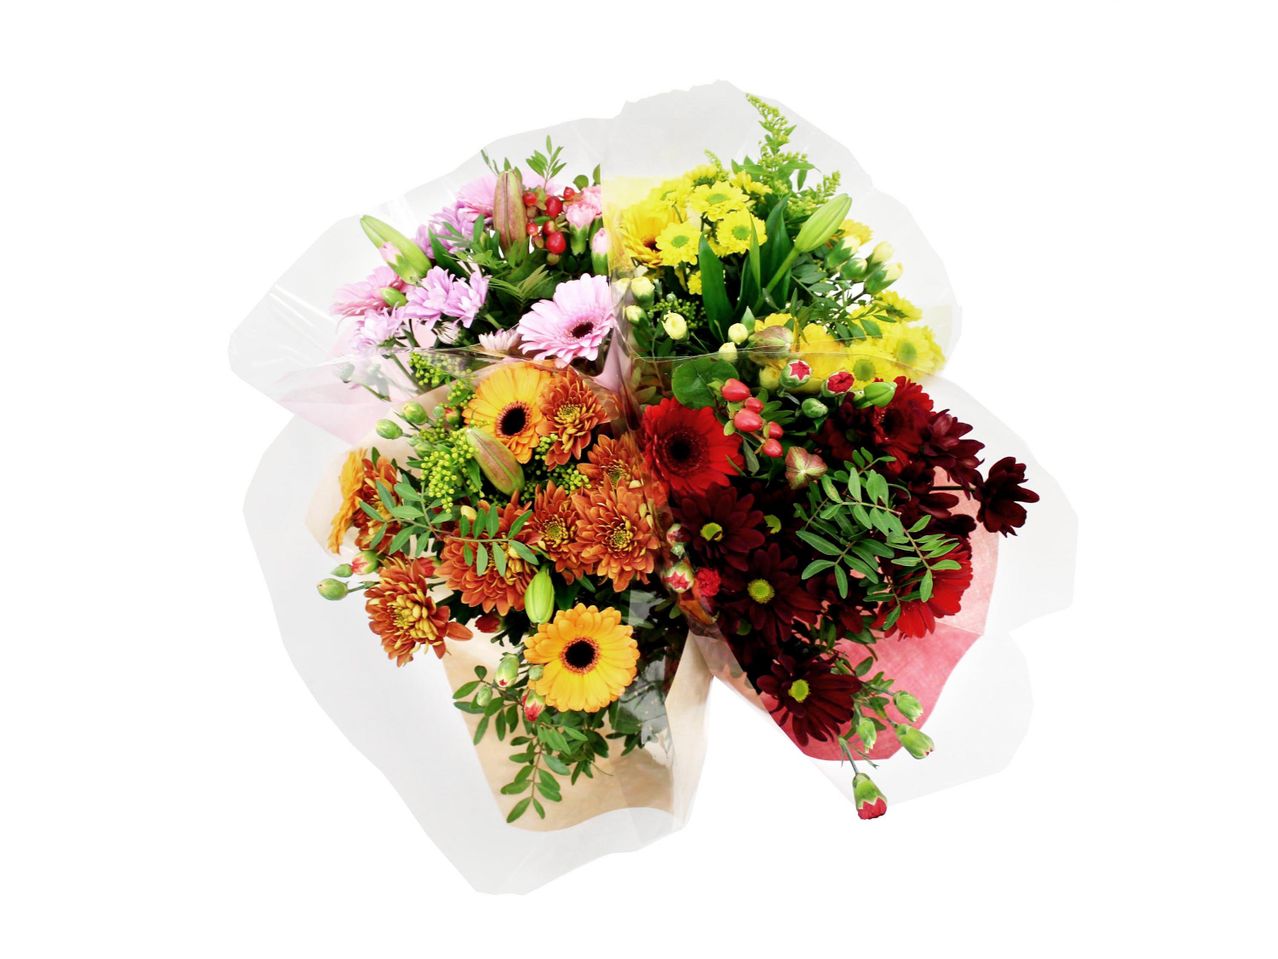 Go to full screen view: Bouquet - Image 1